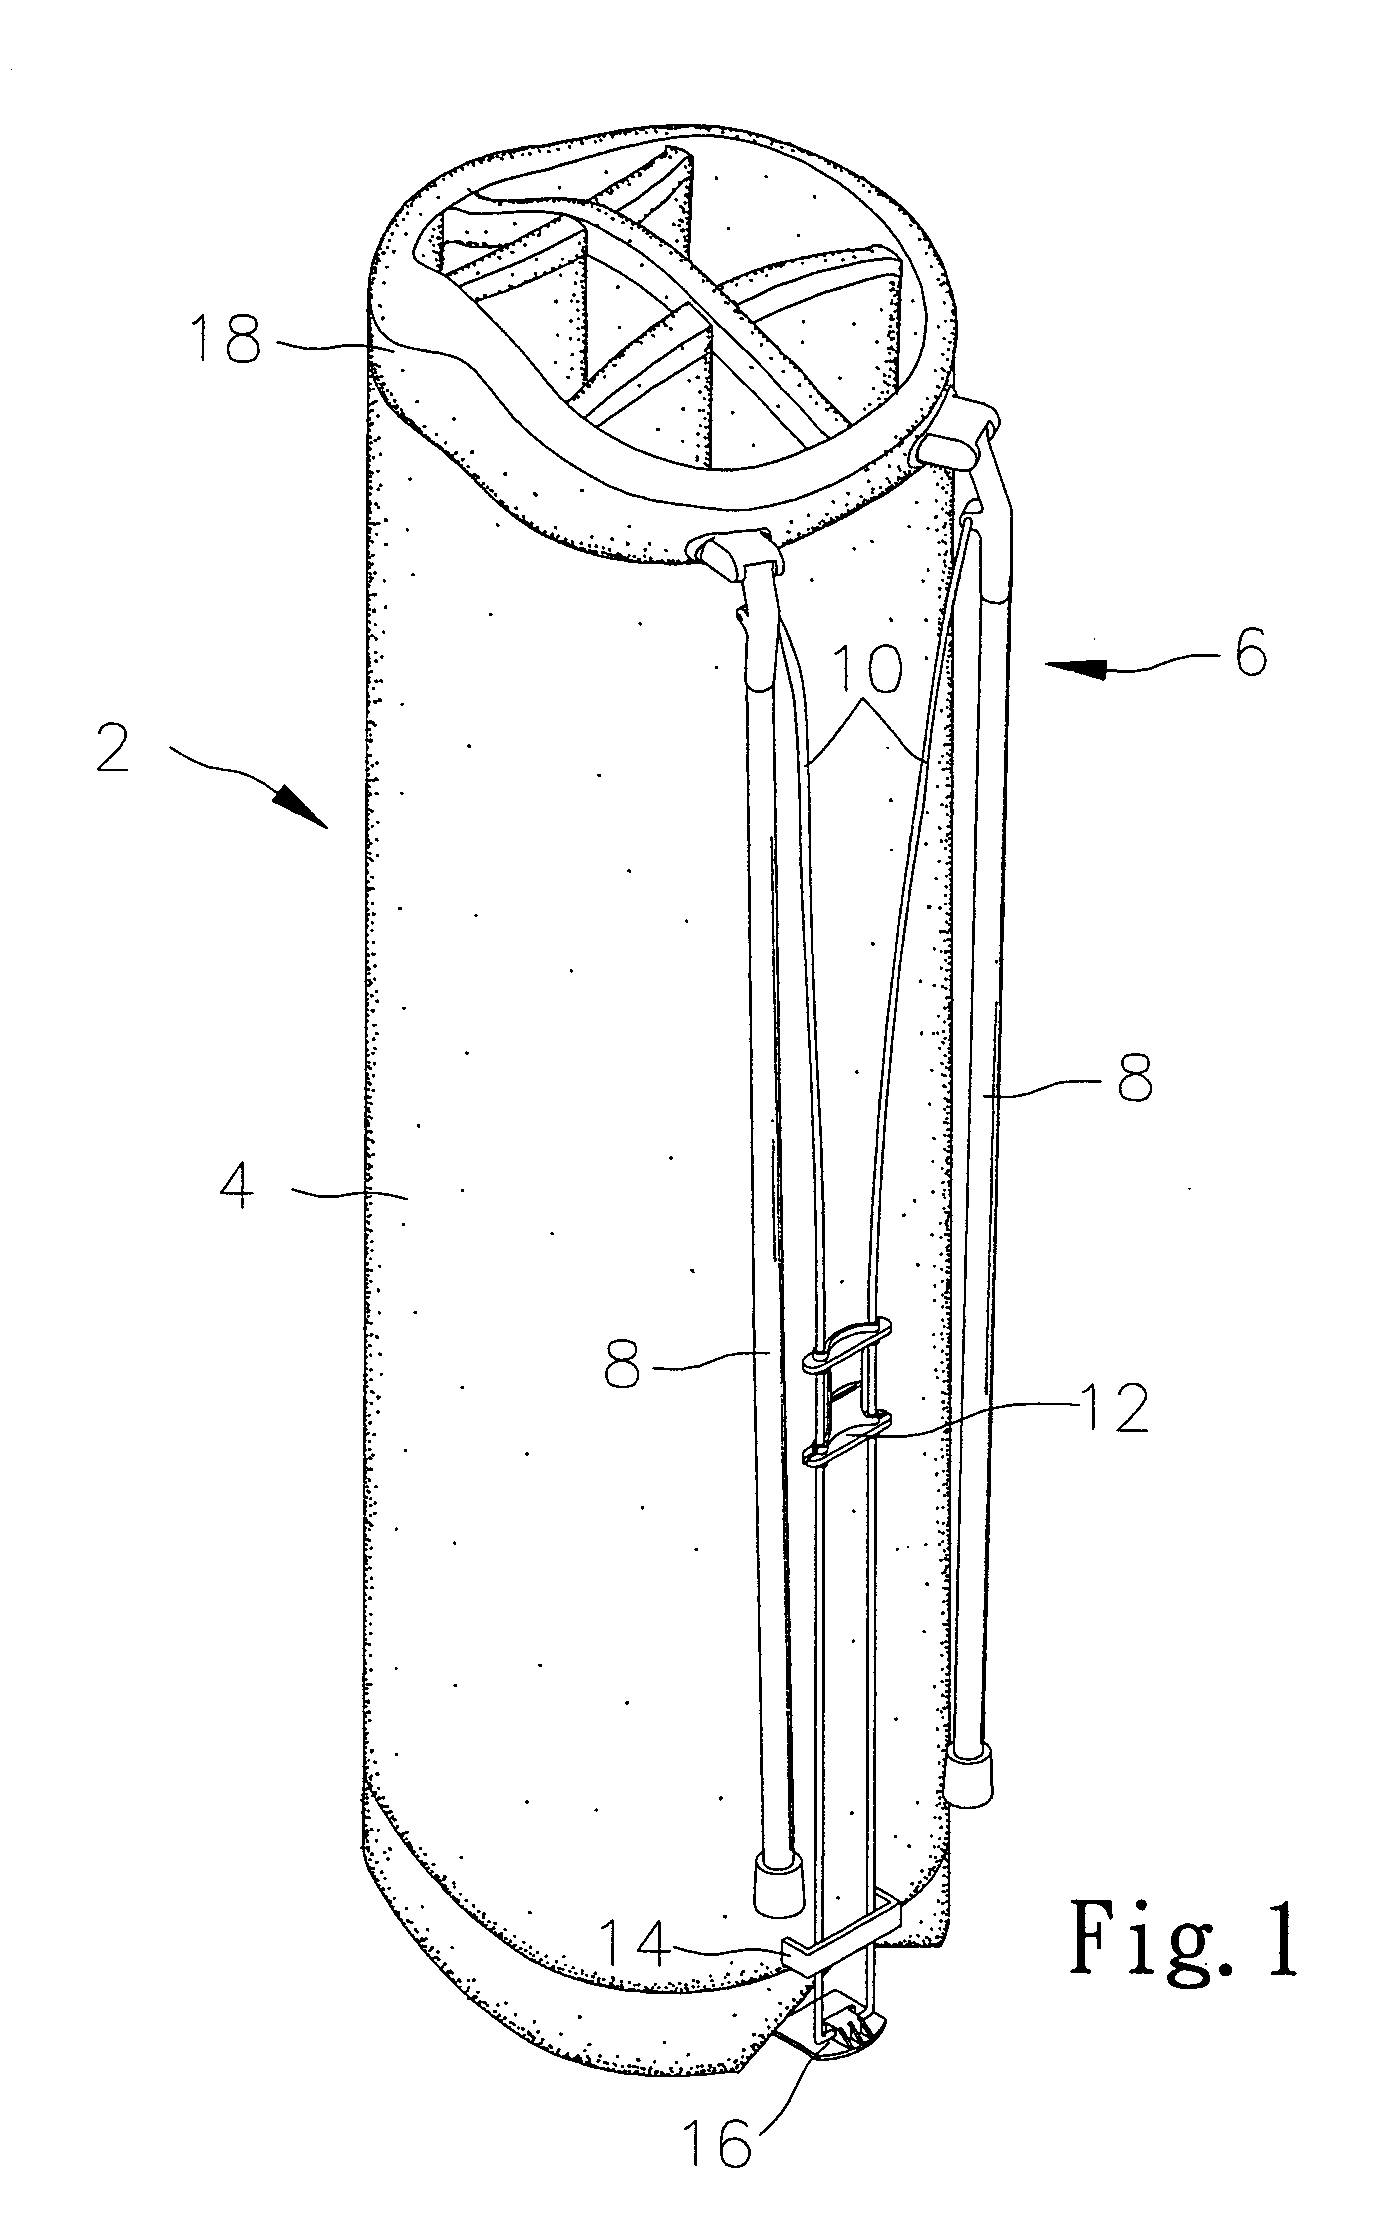 Apparatus for carrying golf clubs